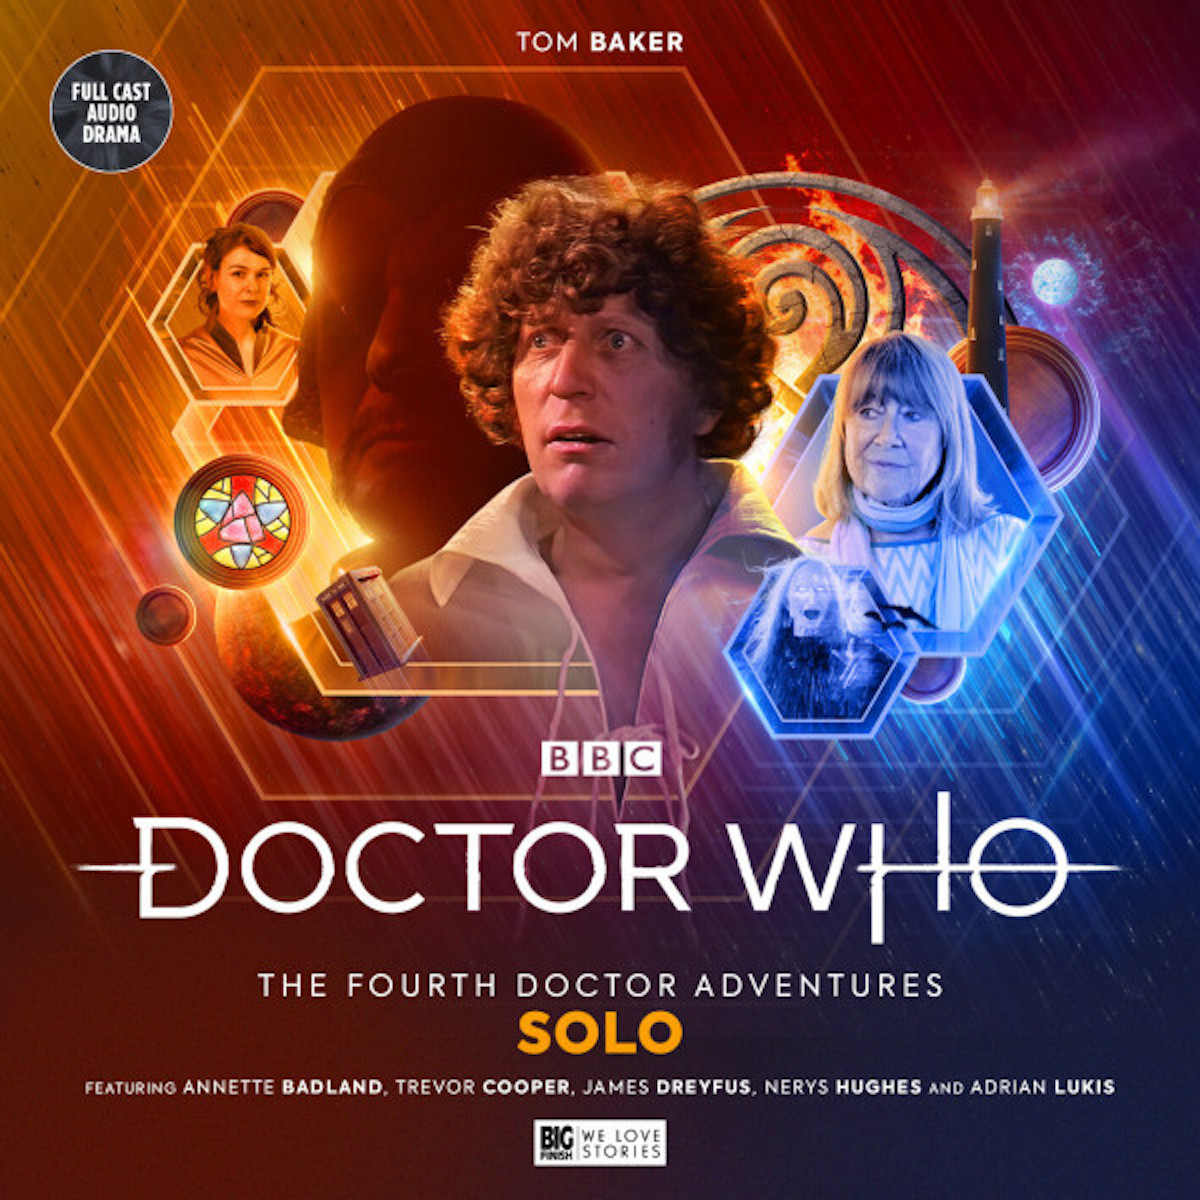 The Fourth Doctor Adventures Series 11: Volume 2